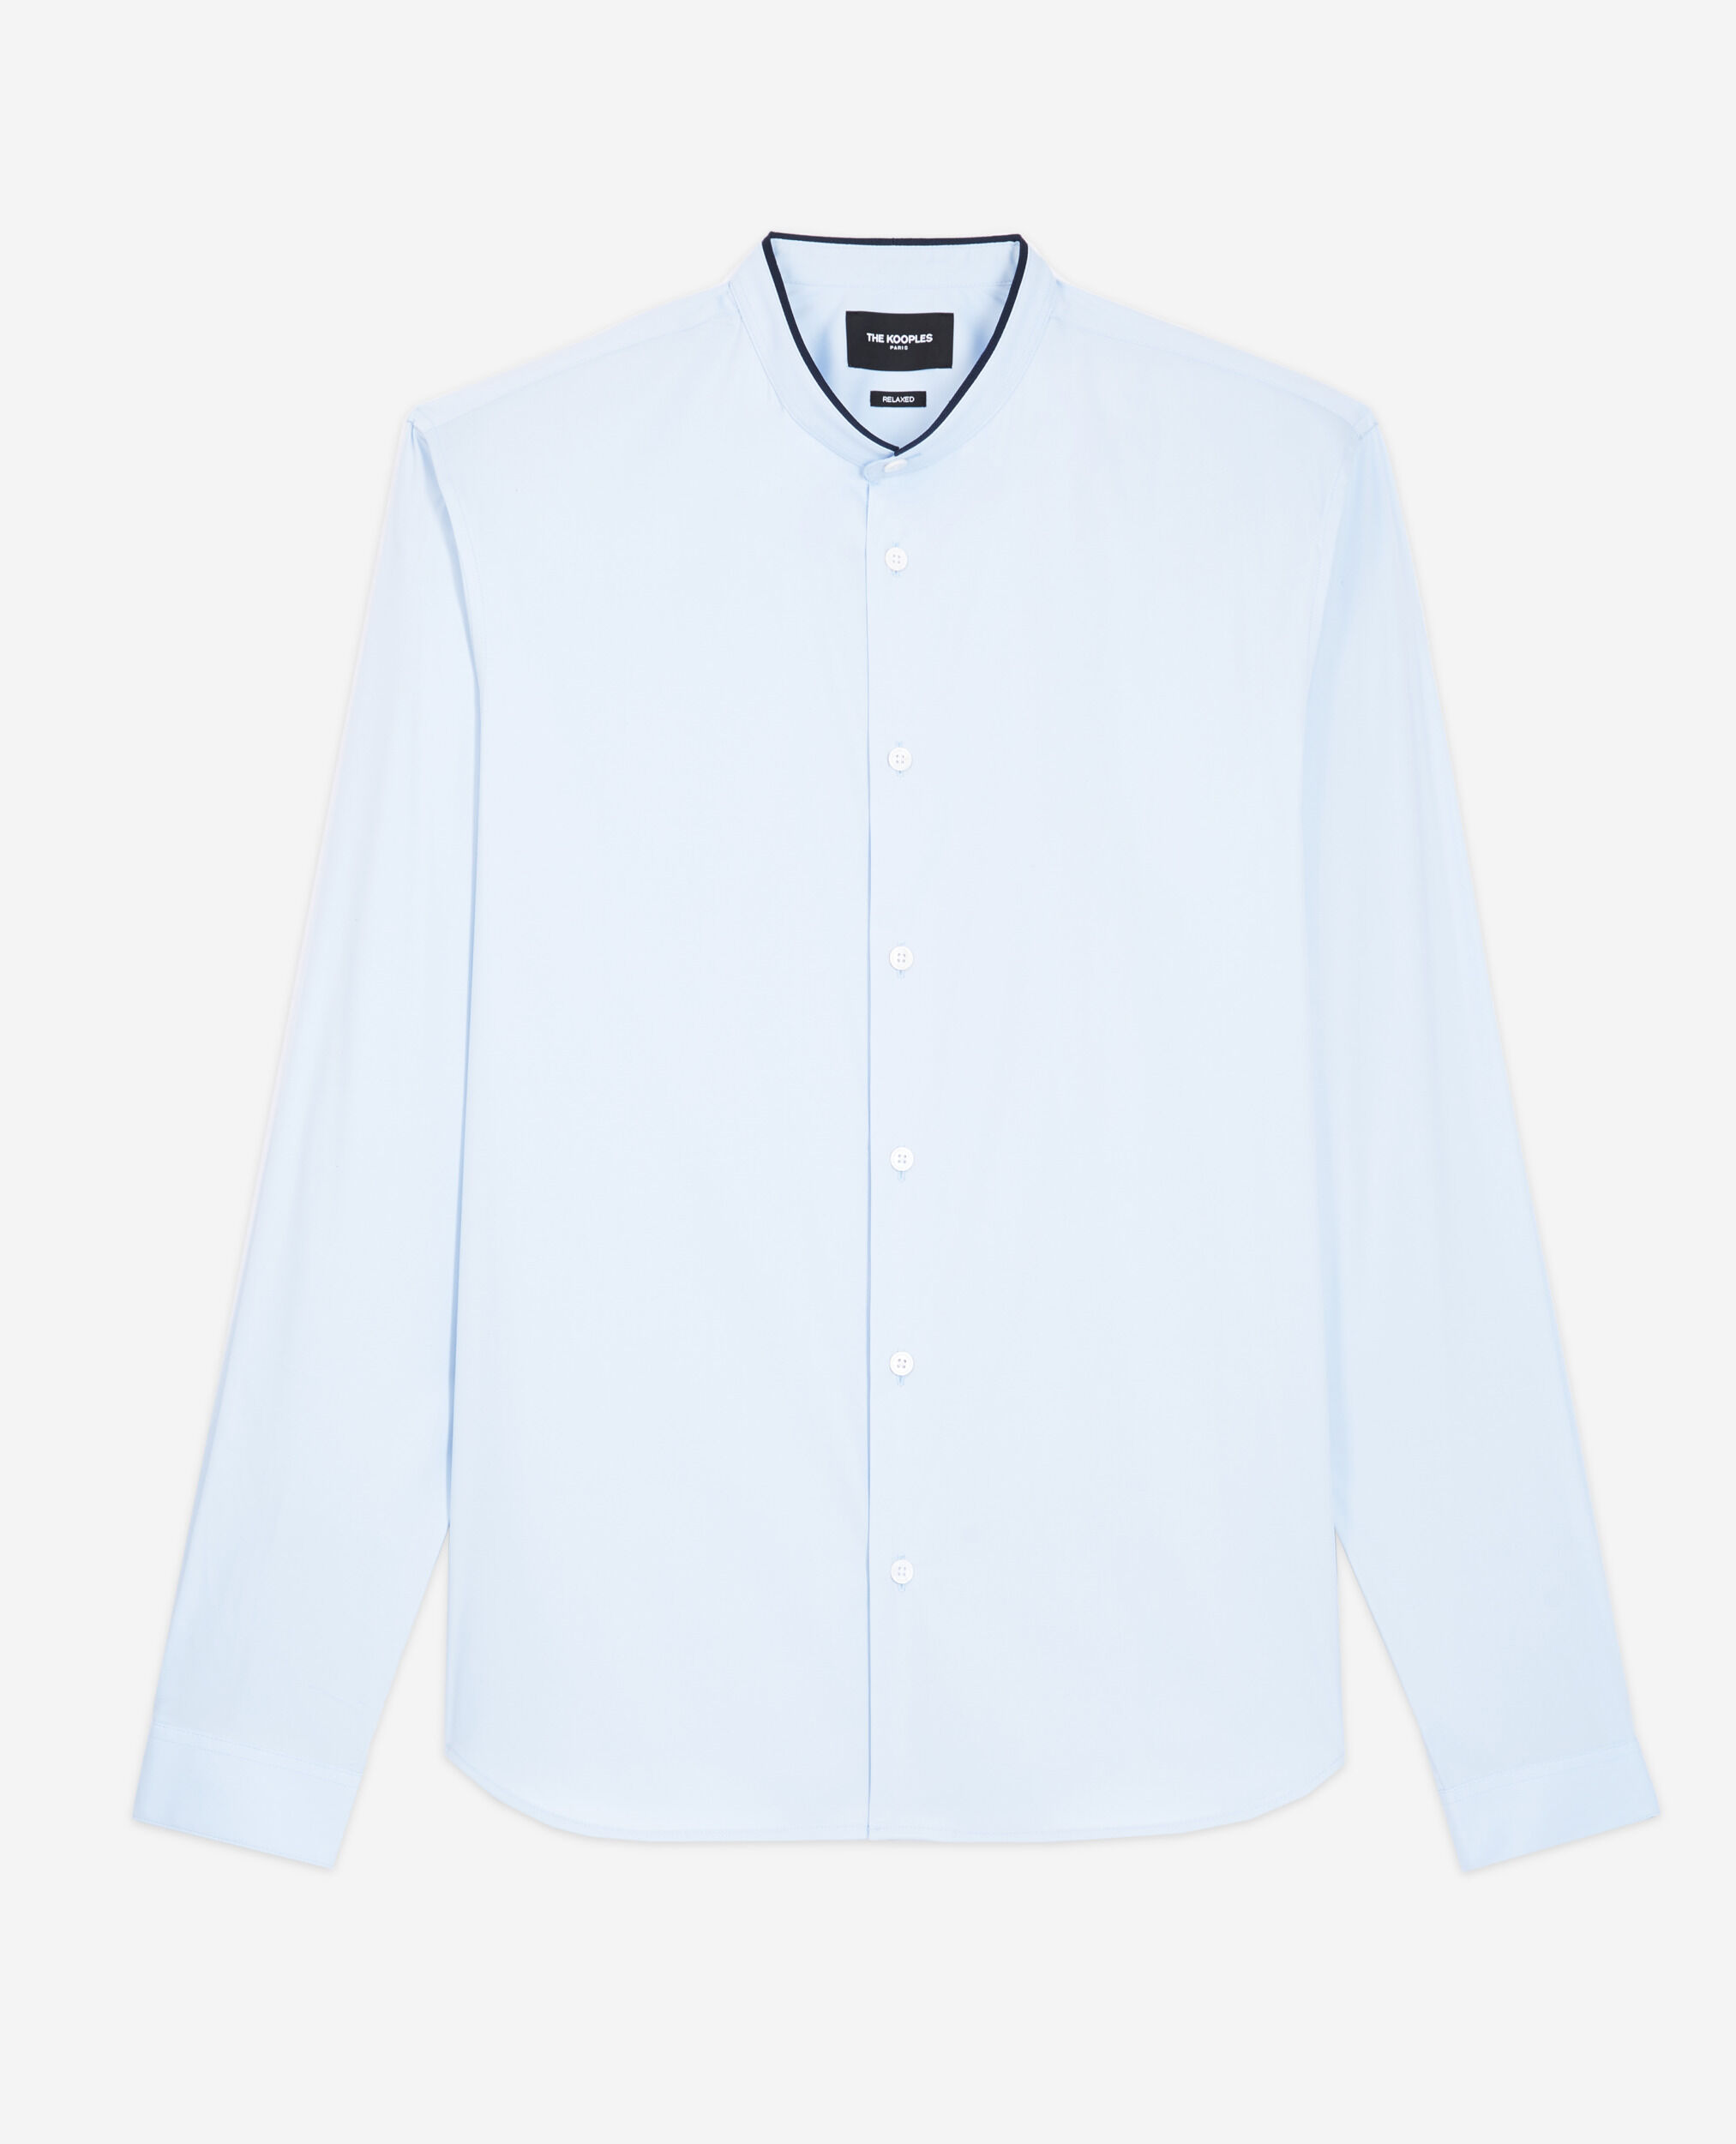 Chemise bleue, SKY, hi-res image number null